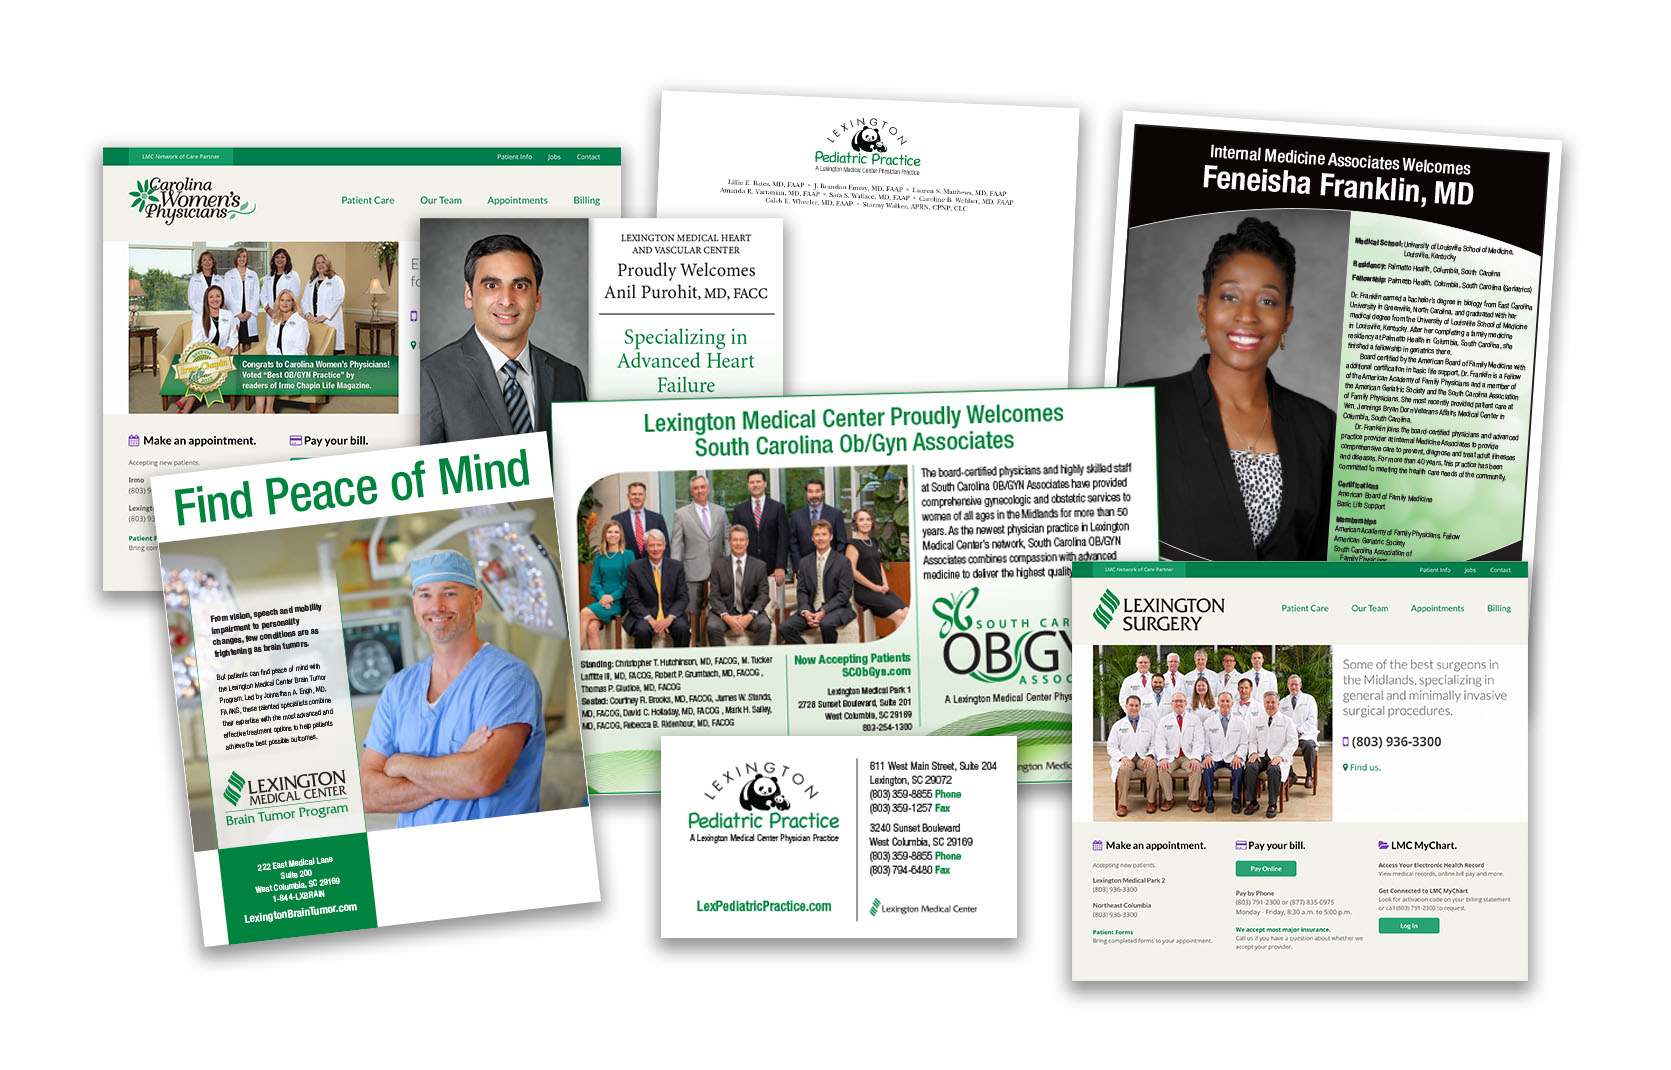 Collage of LMC marketing materials including websites, physician selection guide, direct mail, forms and letterhead featuring practice teams, services and individual physicians.